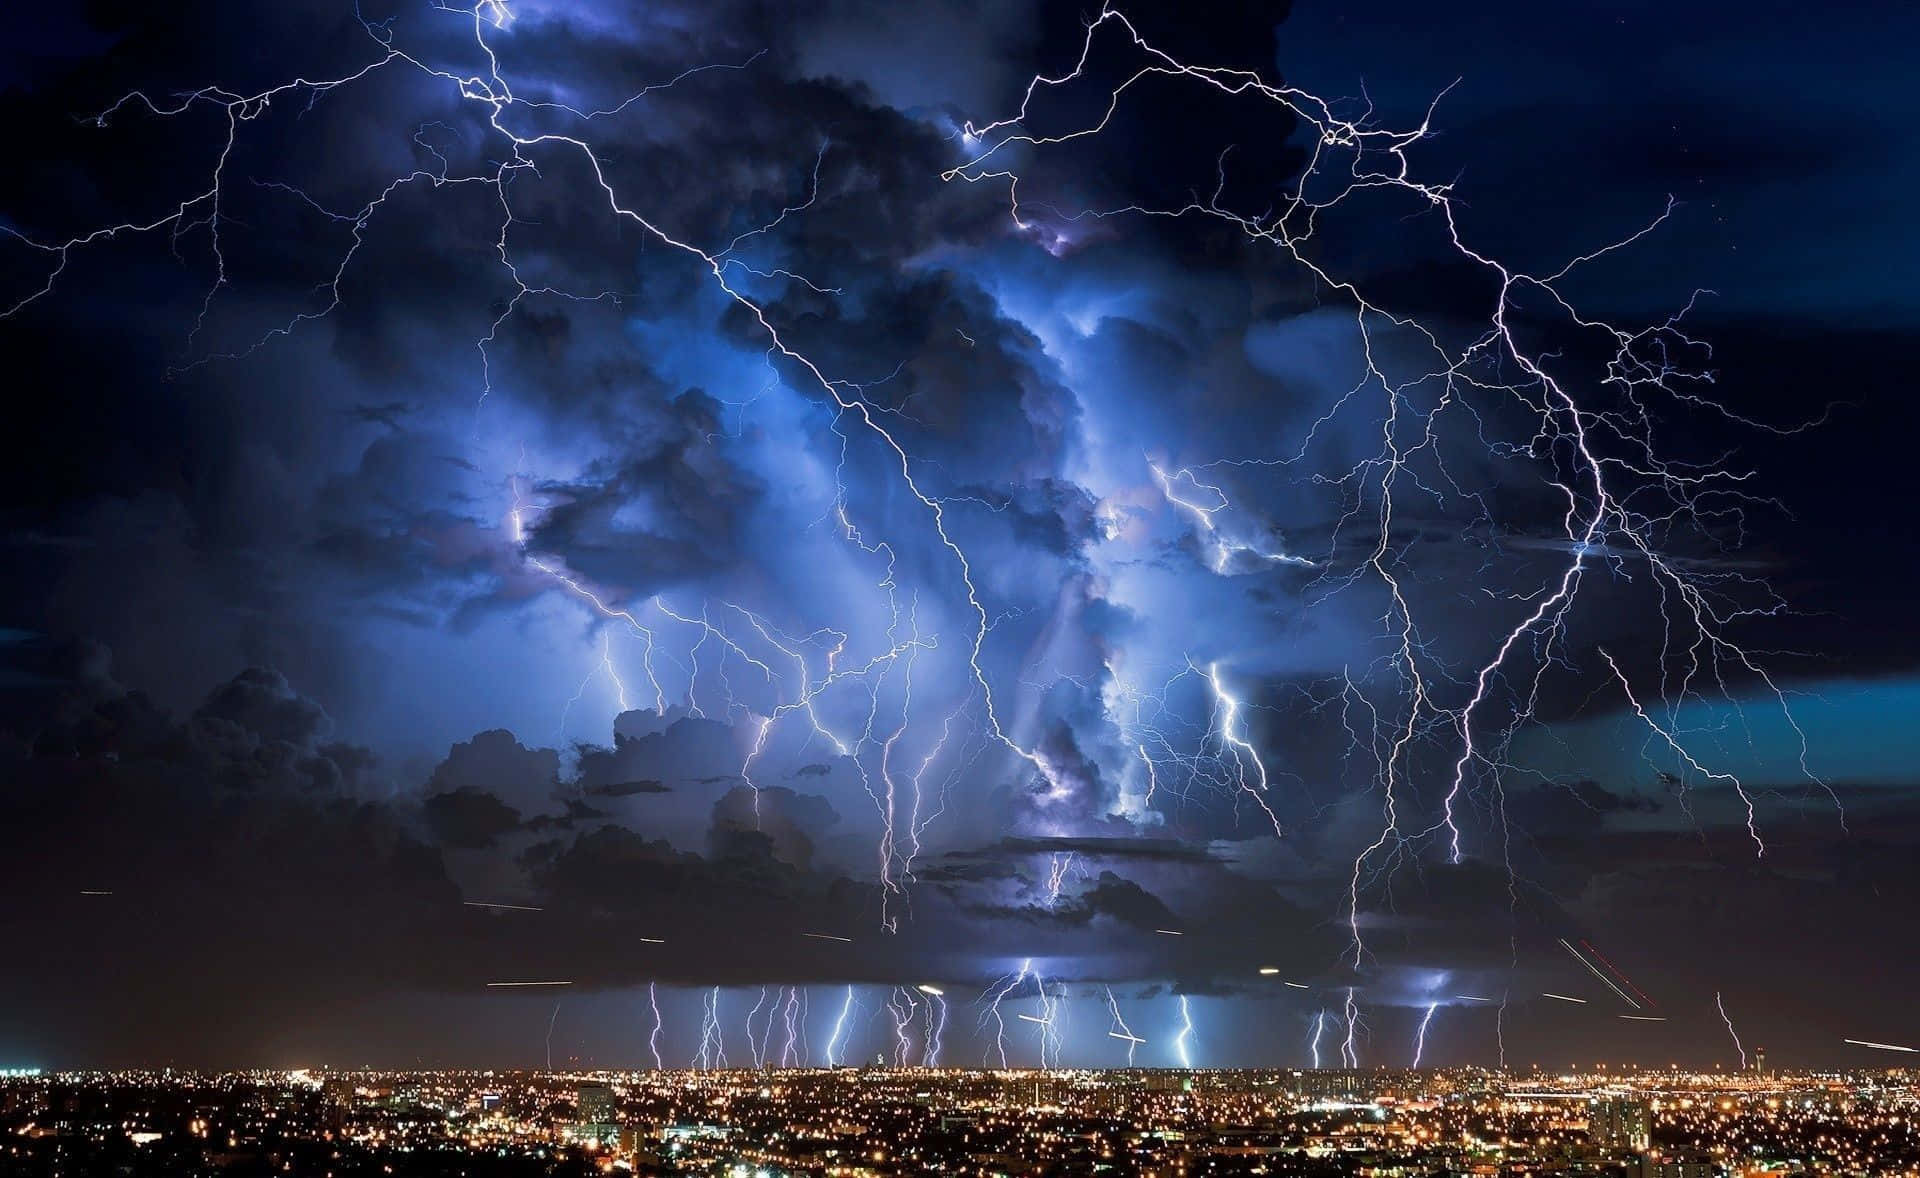 Spectacular Thunderstorm Unfolding in the Night Sky